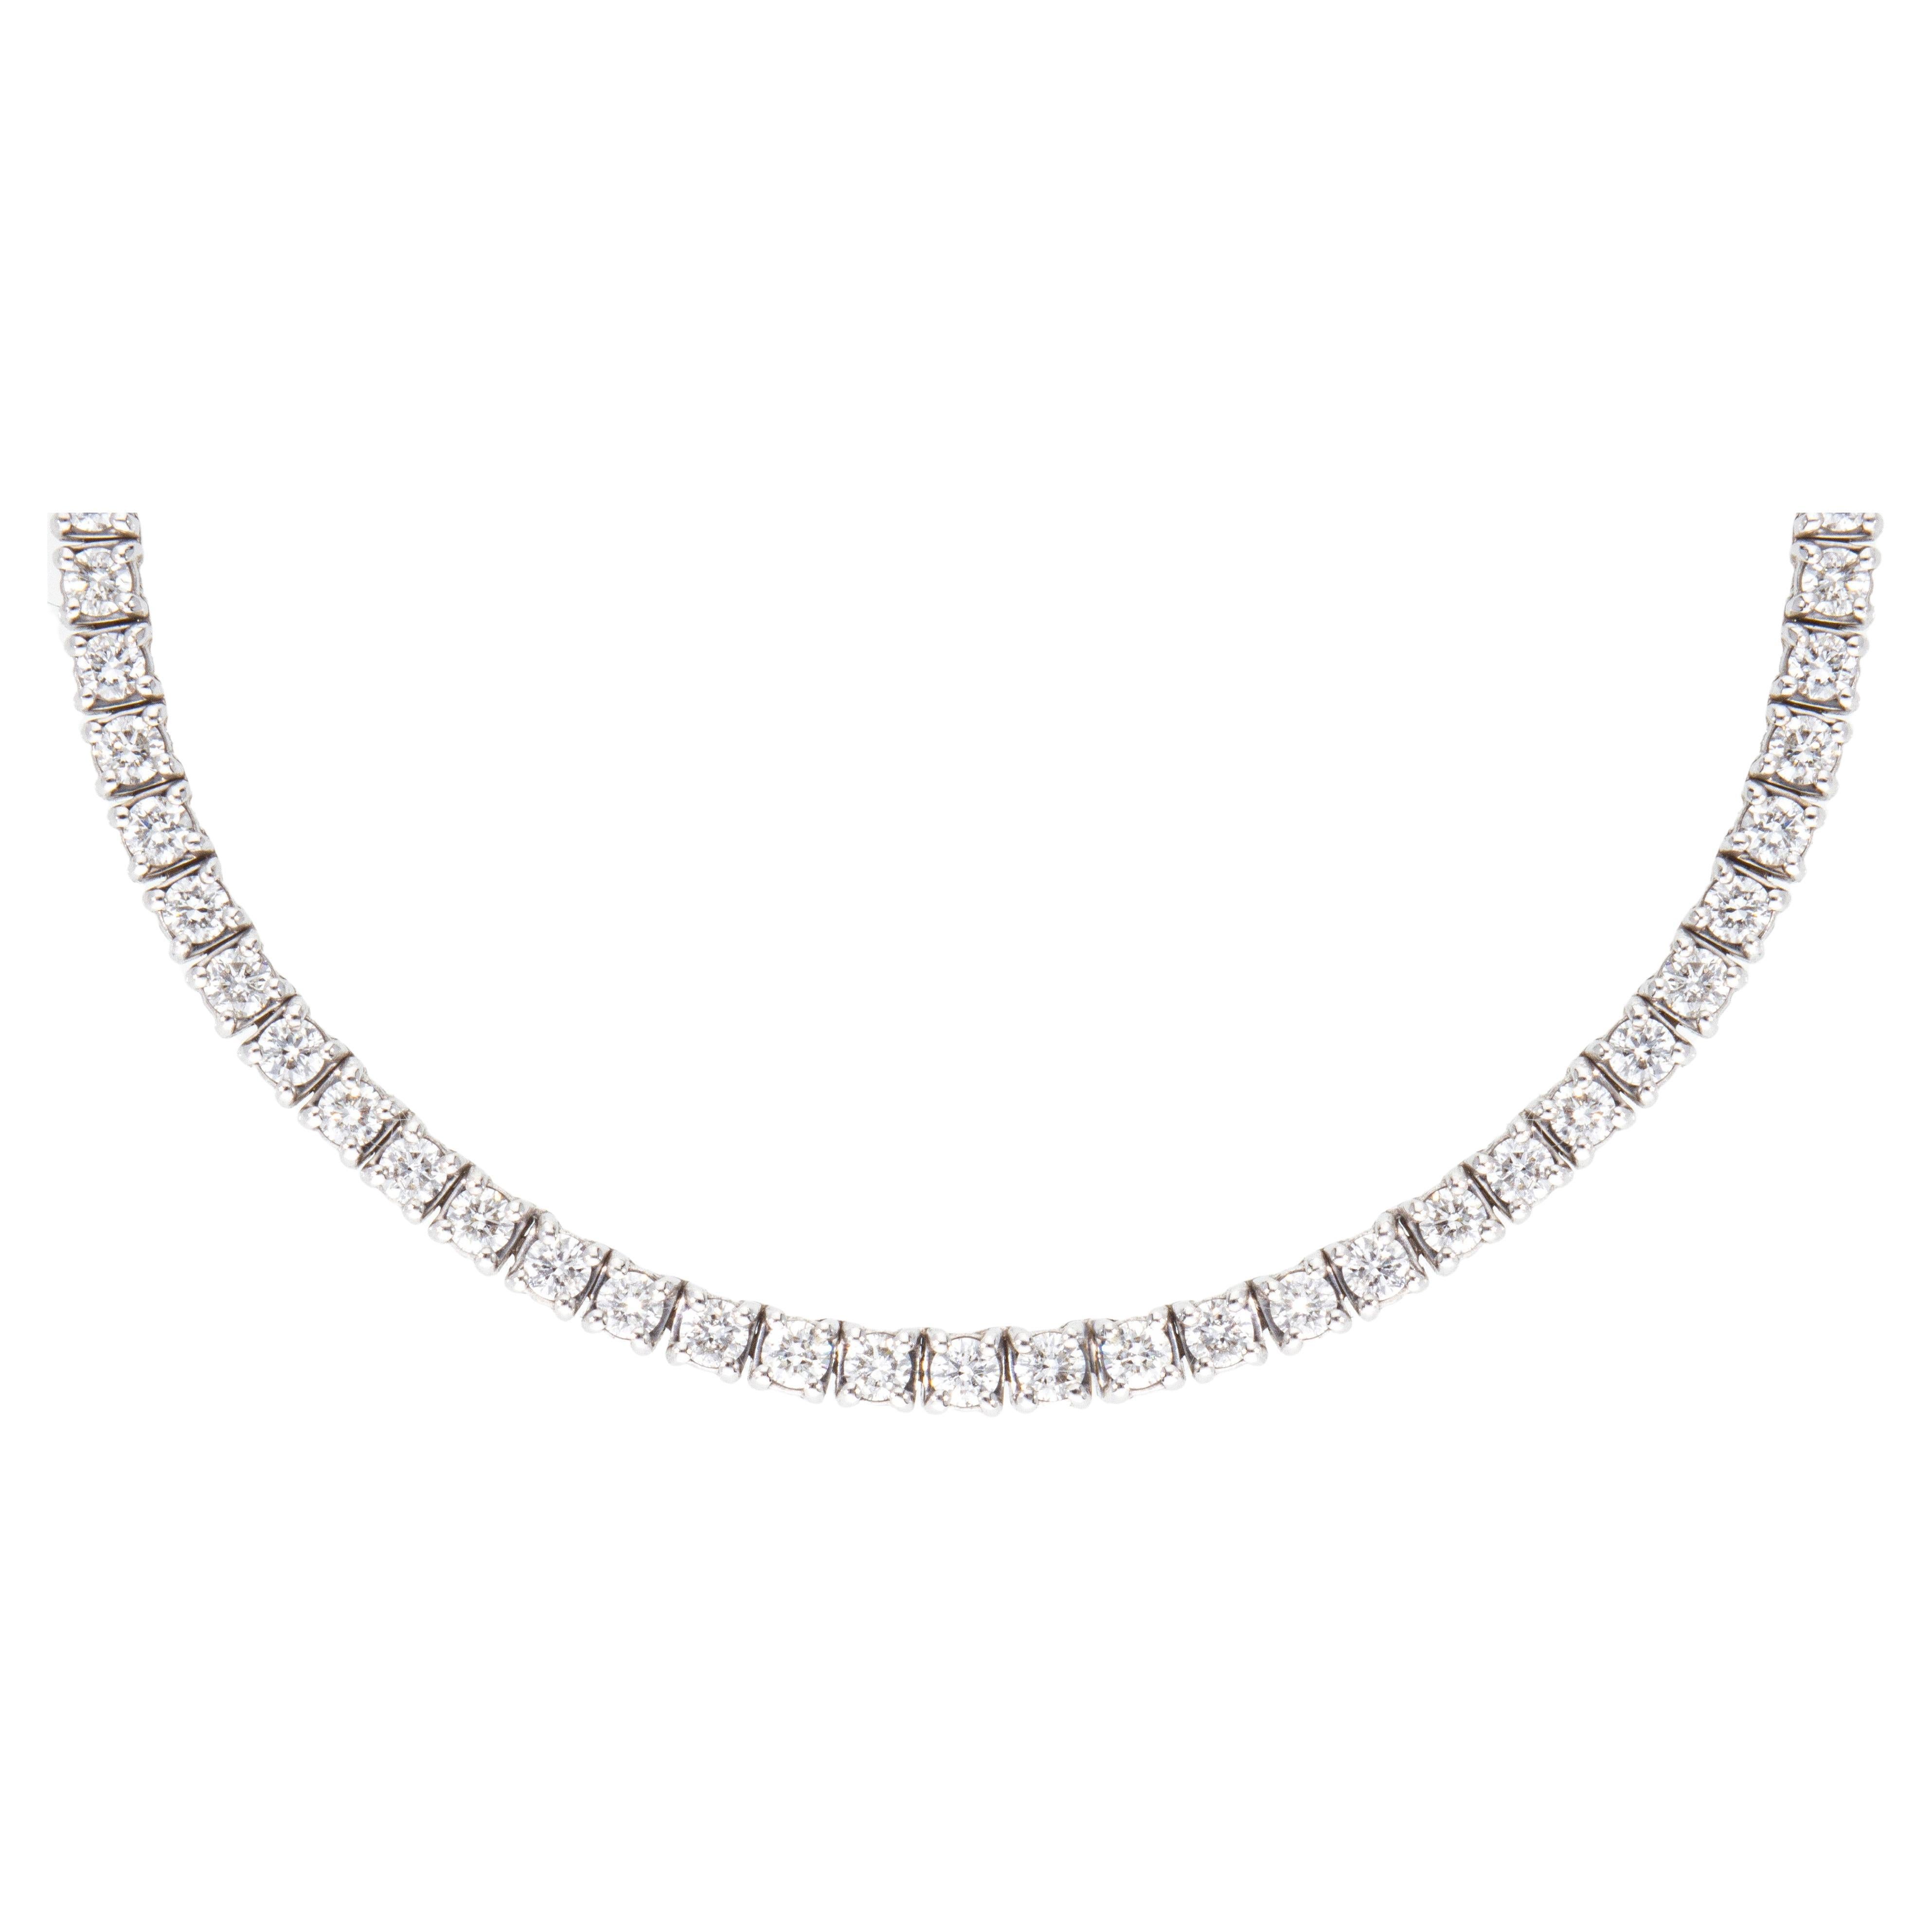 Necklace with 154 Brilliant Cut Diamonds, Total Carat Weight Ct 4.41 For Sale